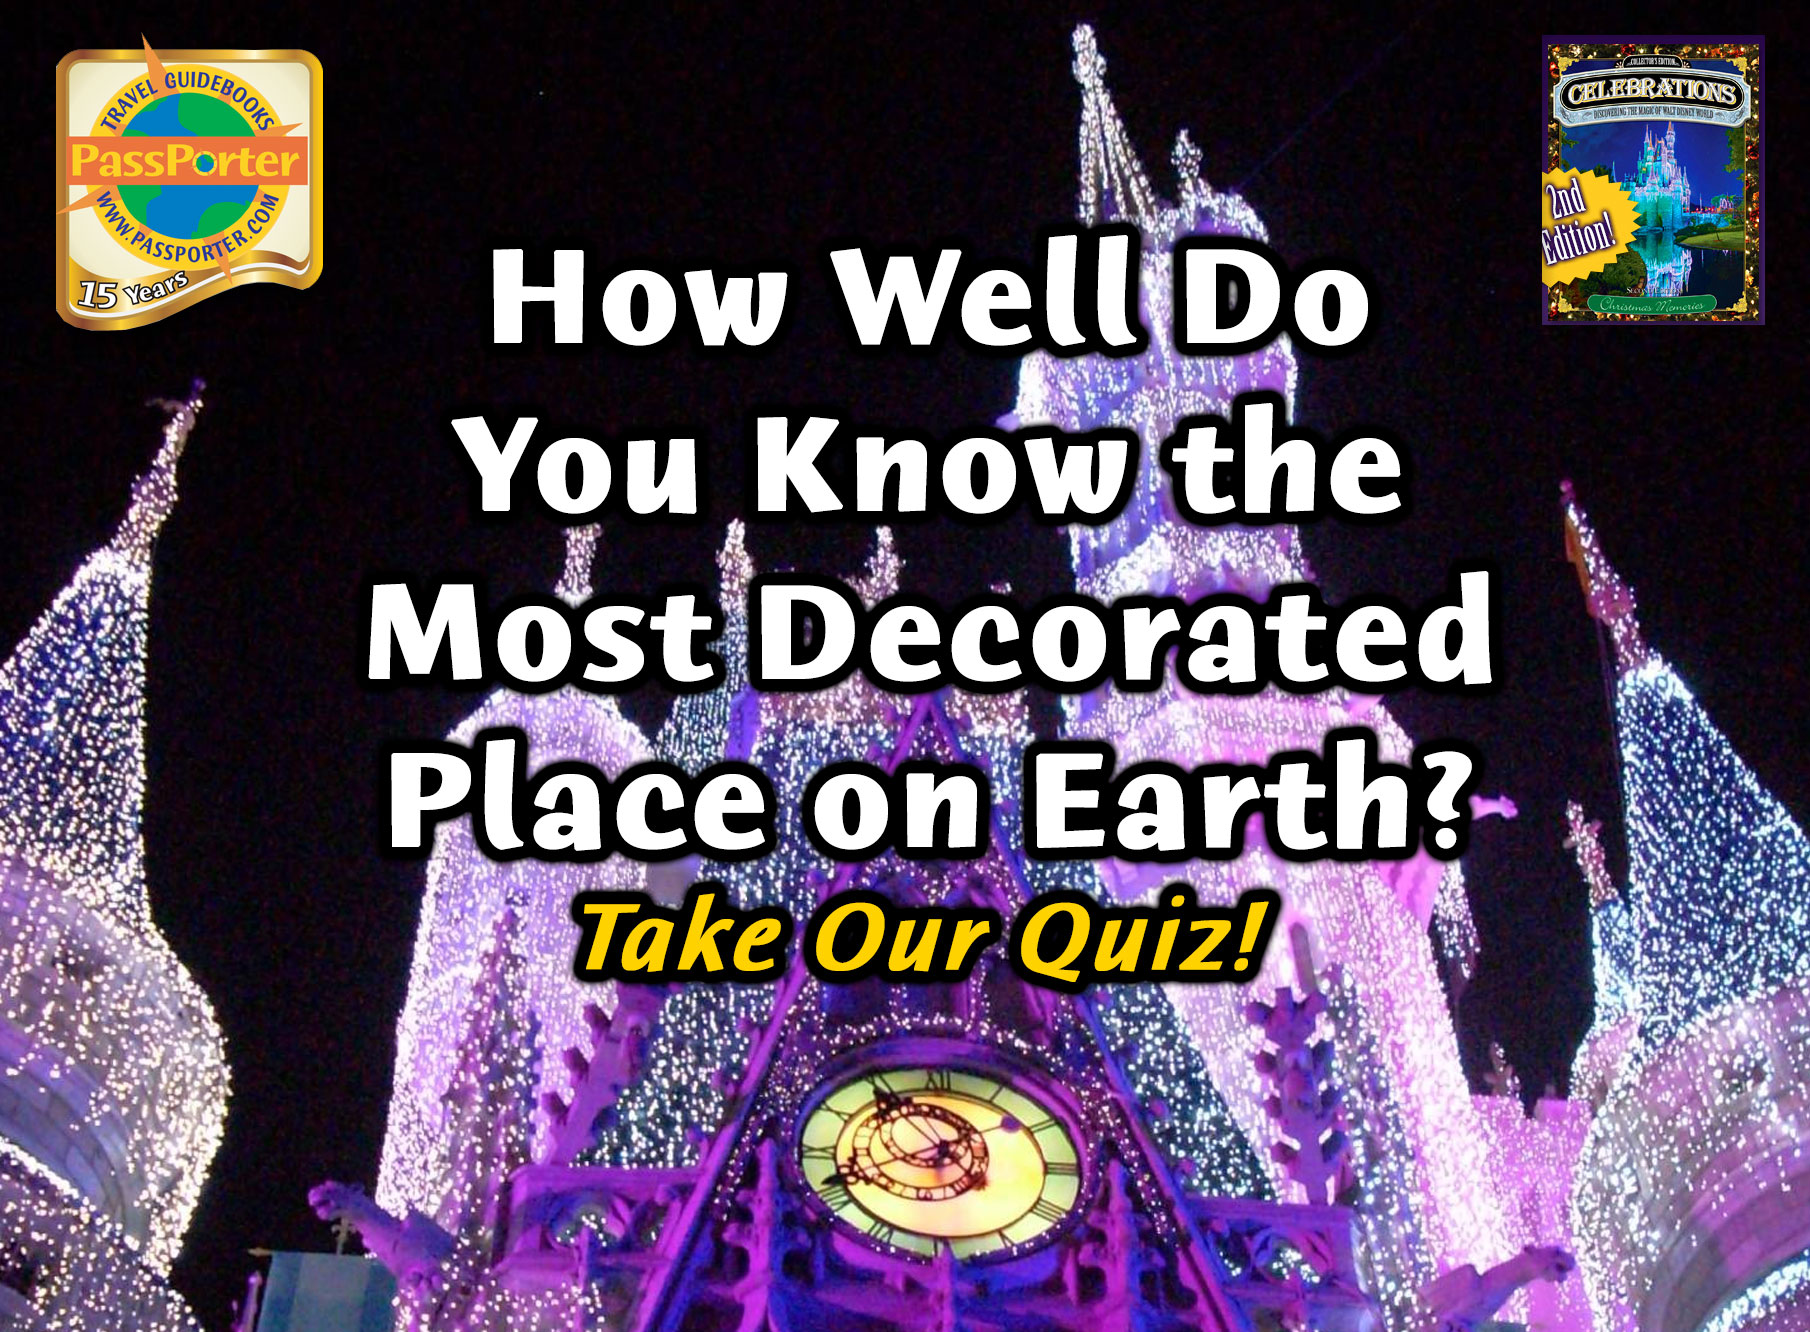 How Well Do You Know the Most Decorated Place on Earth?